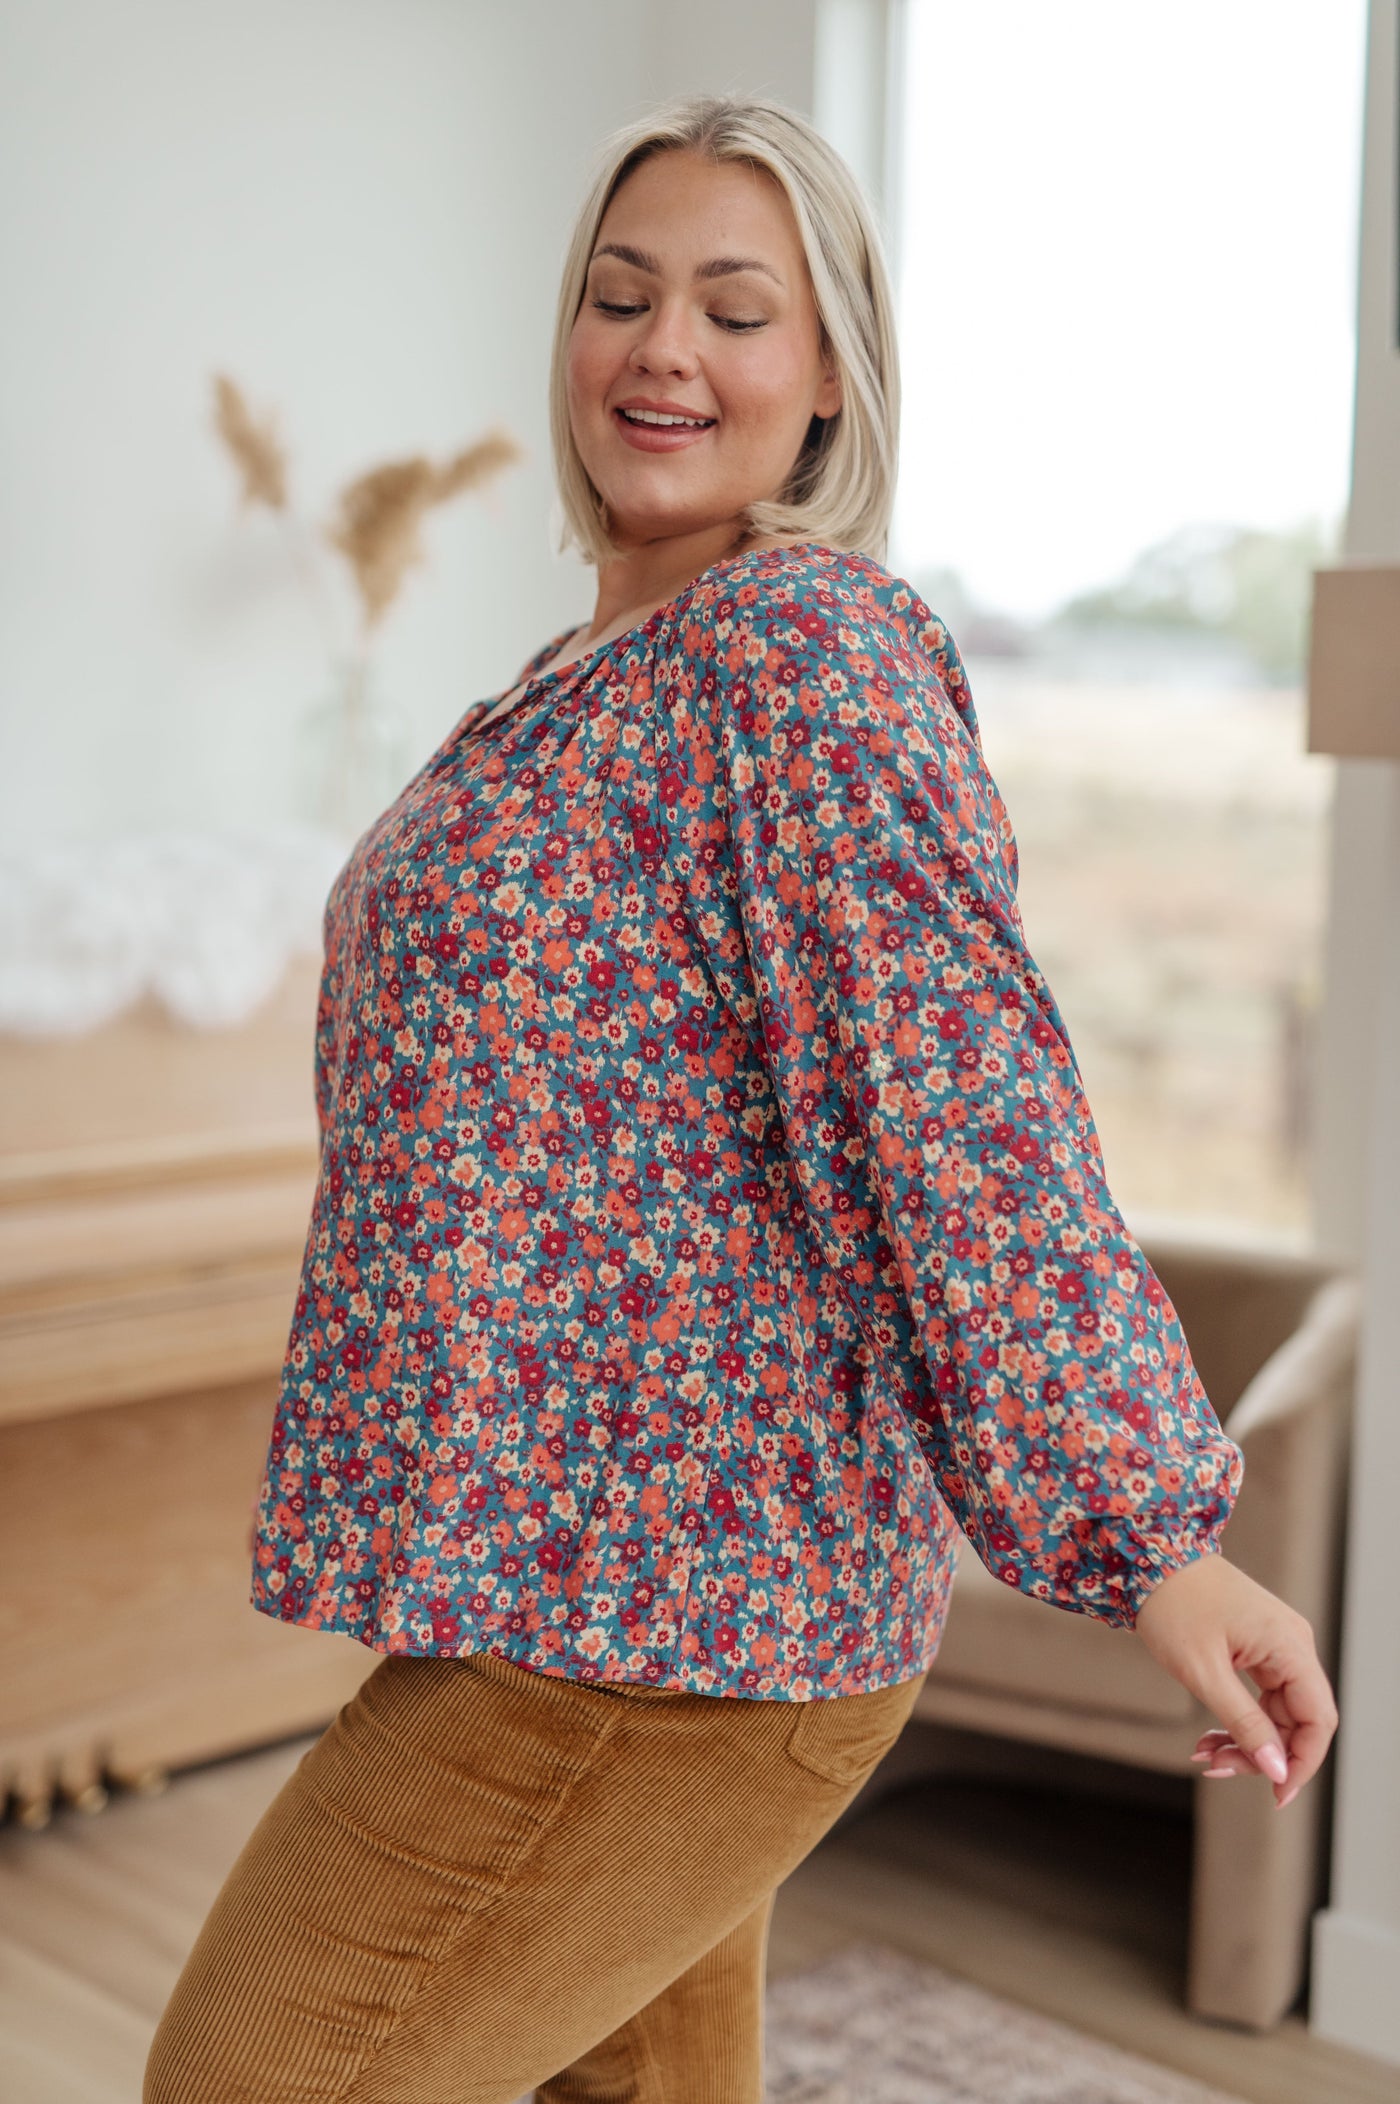 Treat yourself to a beautiful look with this Sunday Brunch Blouse. Featuring a gathered v-neckline with balloon sleeves, it's designed to be easy to wear while still maintaining a feminine style